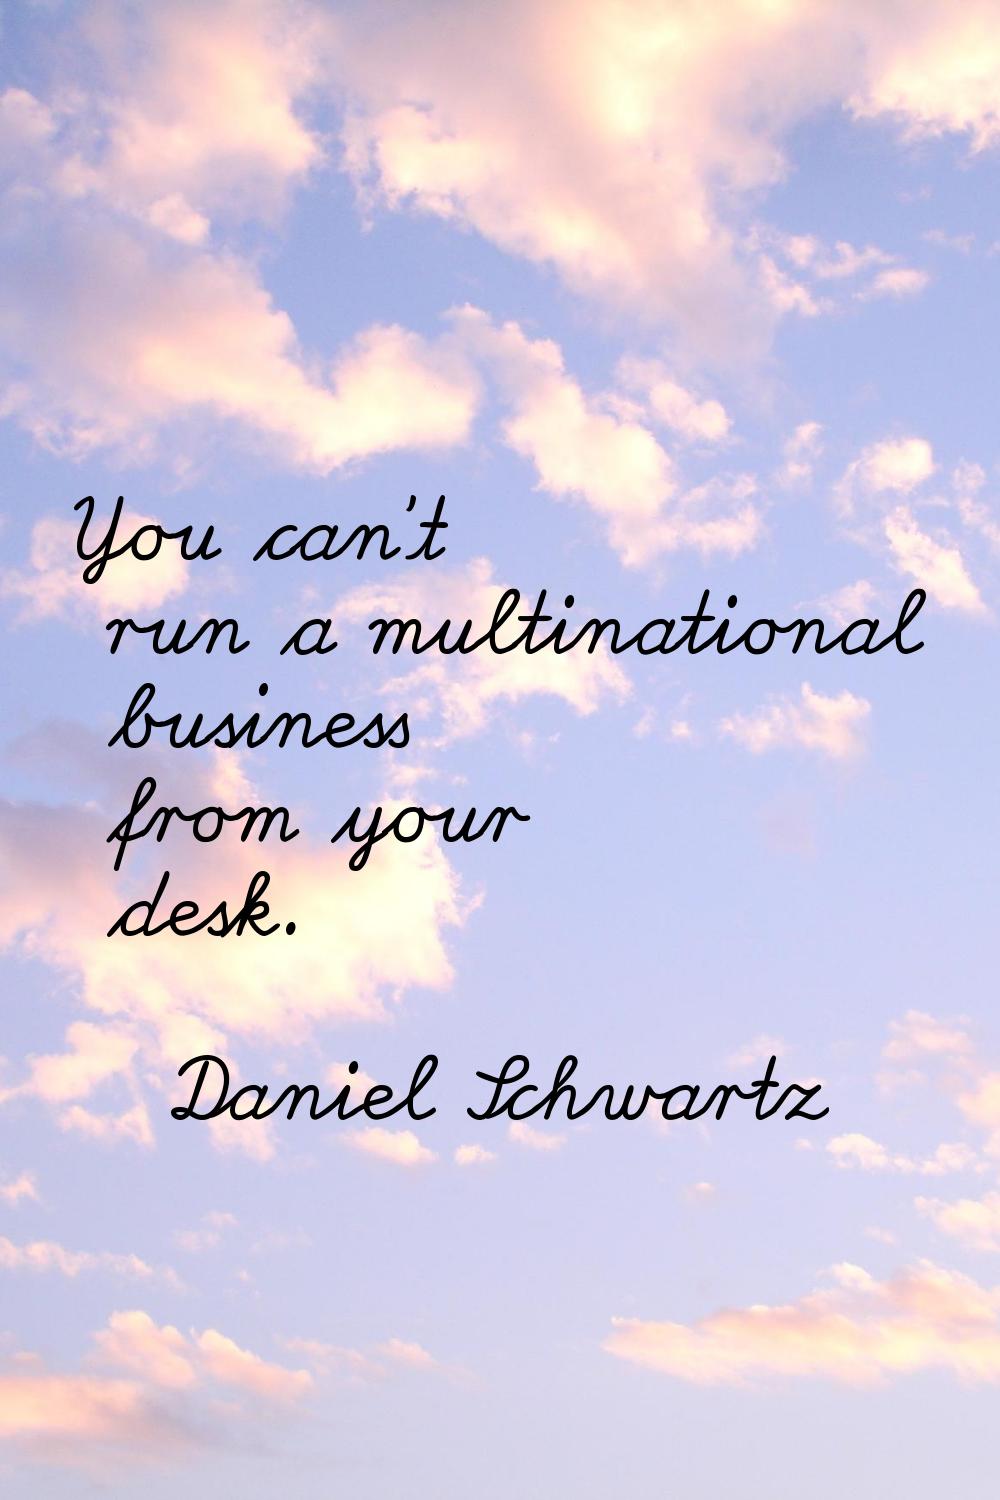 You can't run a multinational business from your desk.